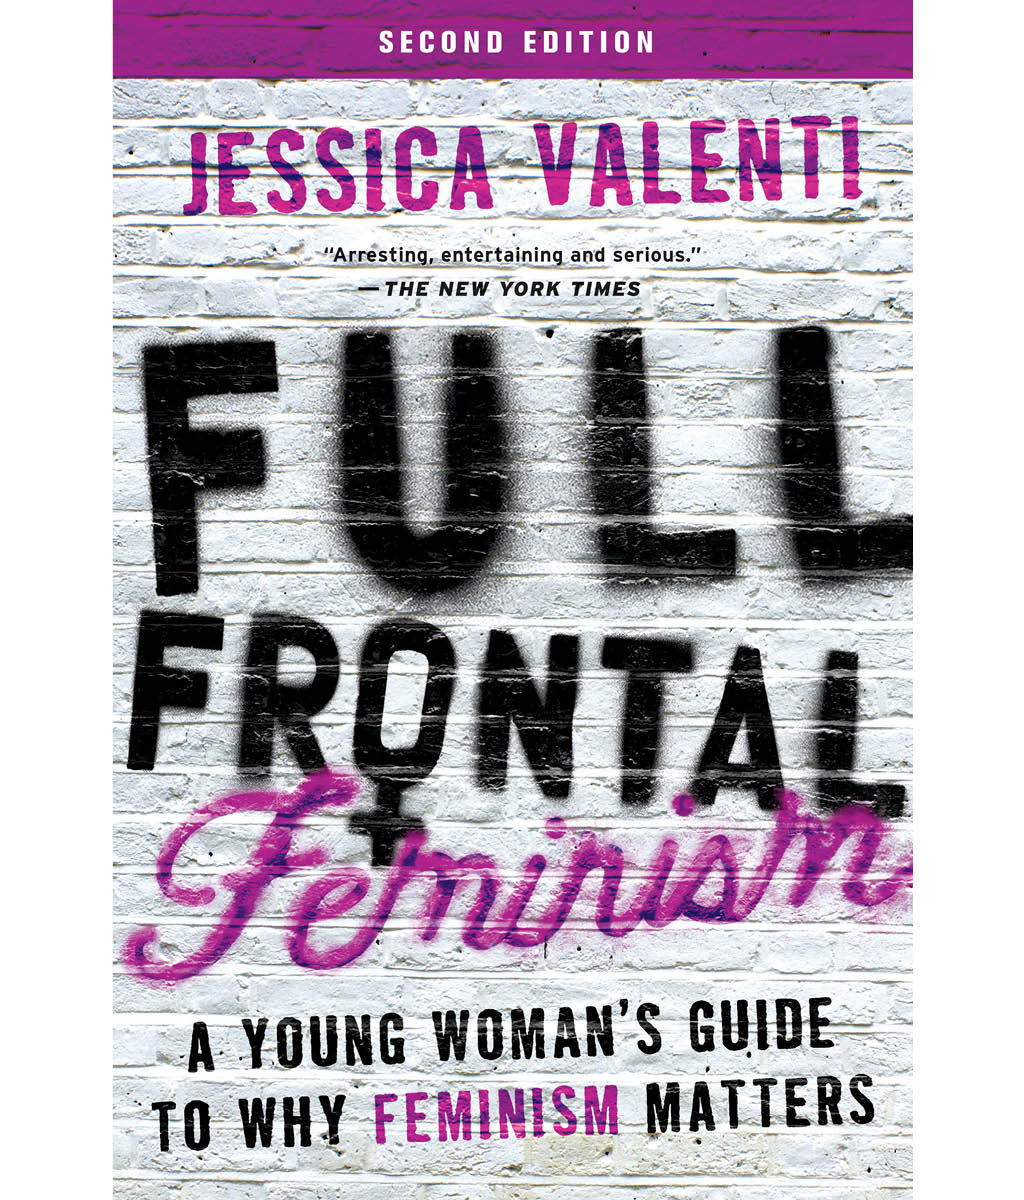 Full frontal feminism: a young woman&#39;s guide to why feminism matters by Jessica Valenti